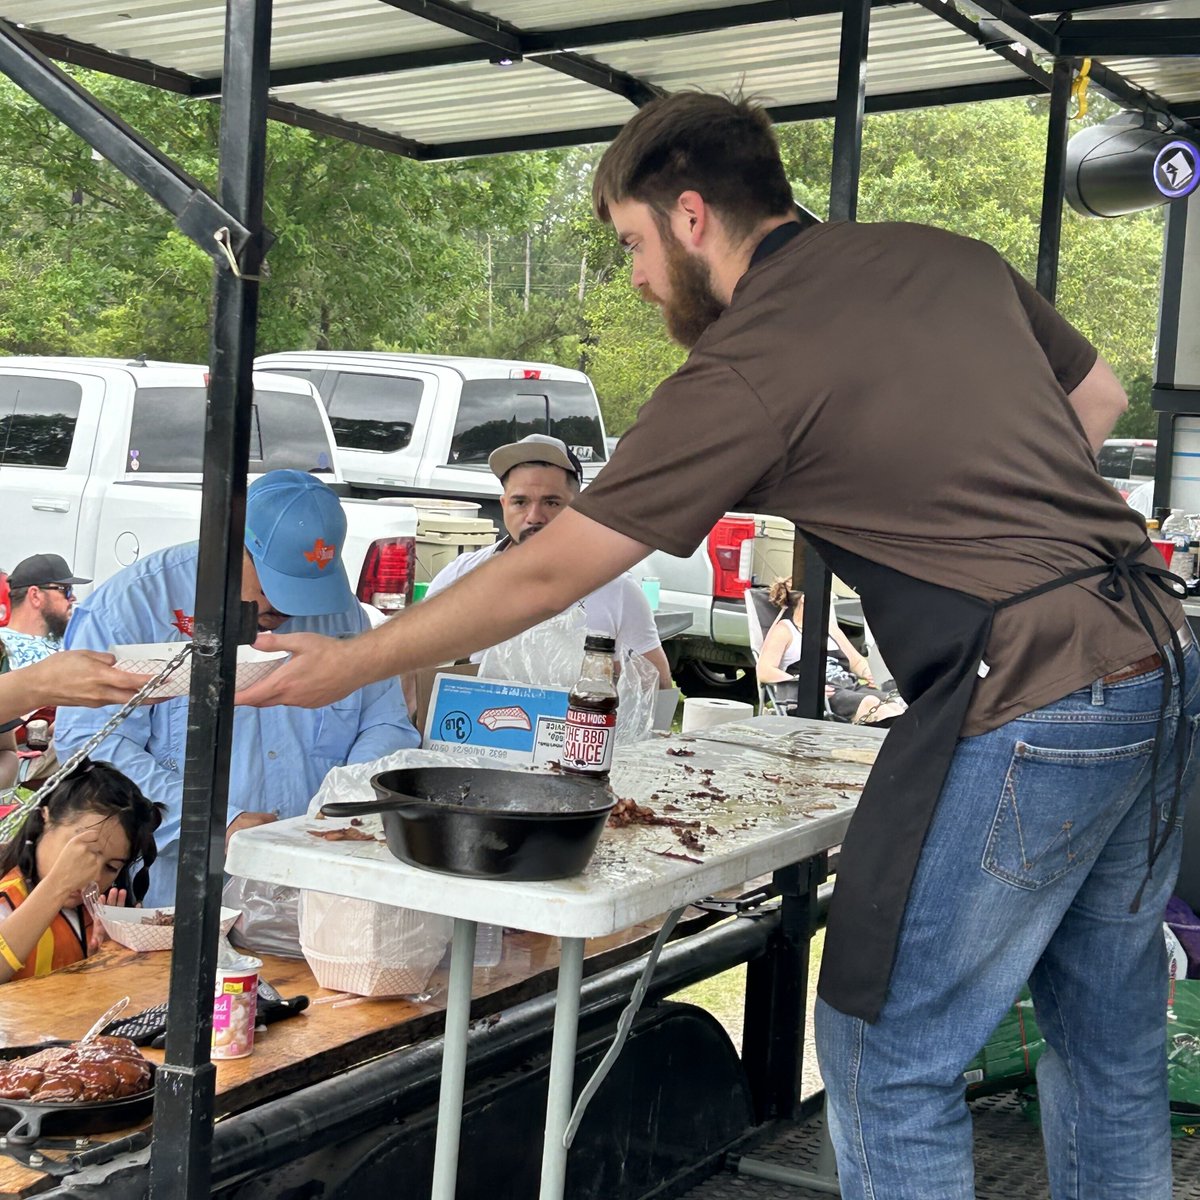 We had a blast at the Zachry Group Family Day Celebration last month! The event was a hit with games, music, and great food. Thanks for having us!

#ourpeople #technicalexpertise #responsiveness #locke #leadingprecast #precastconcrete